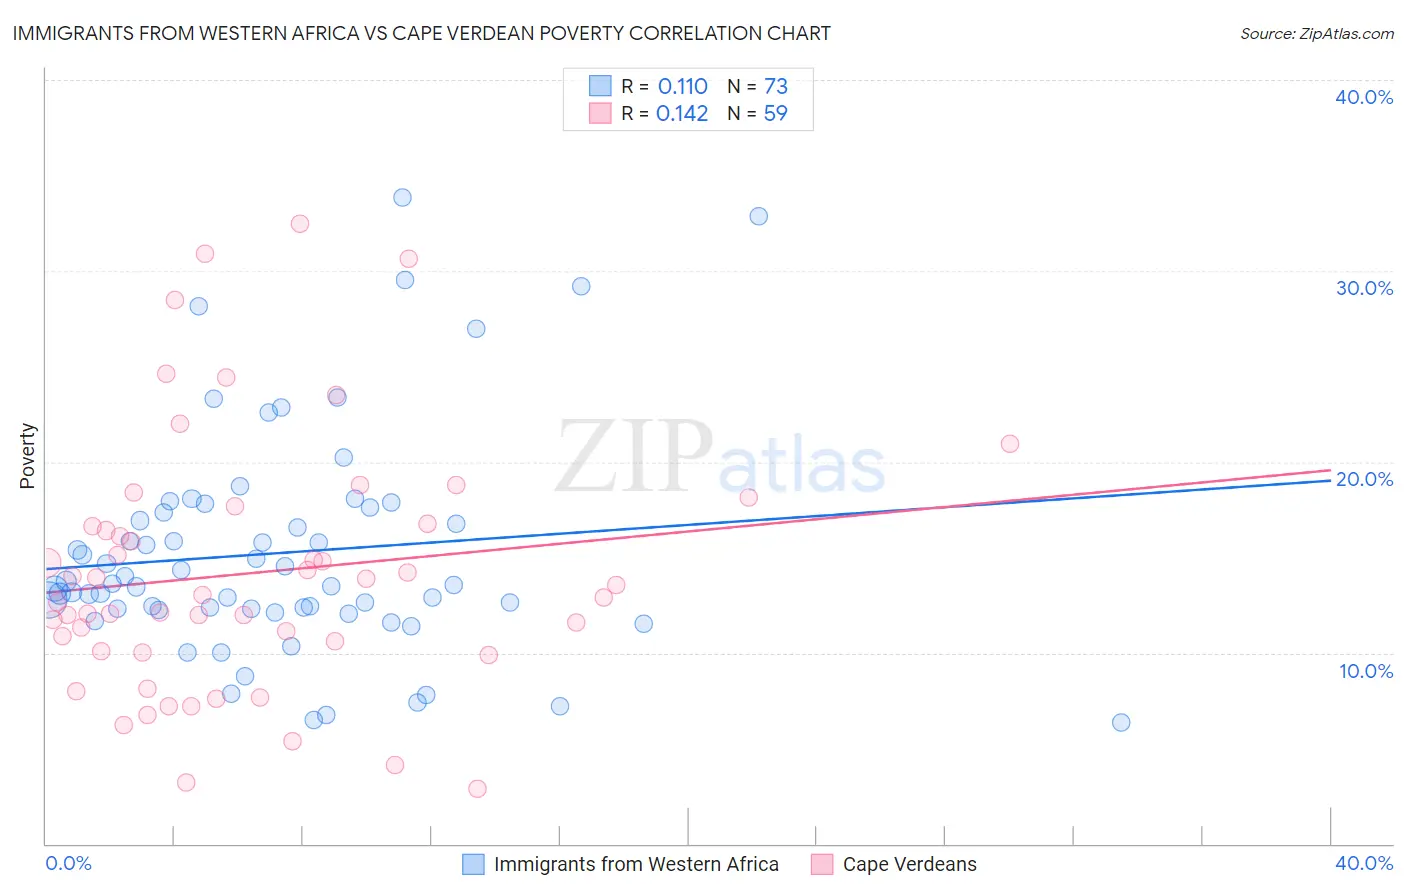 Immigrants from Western Africa vs Cape Verdean Poverty